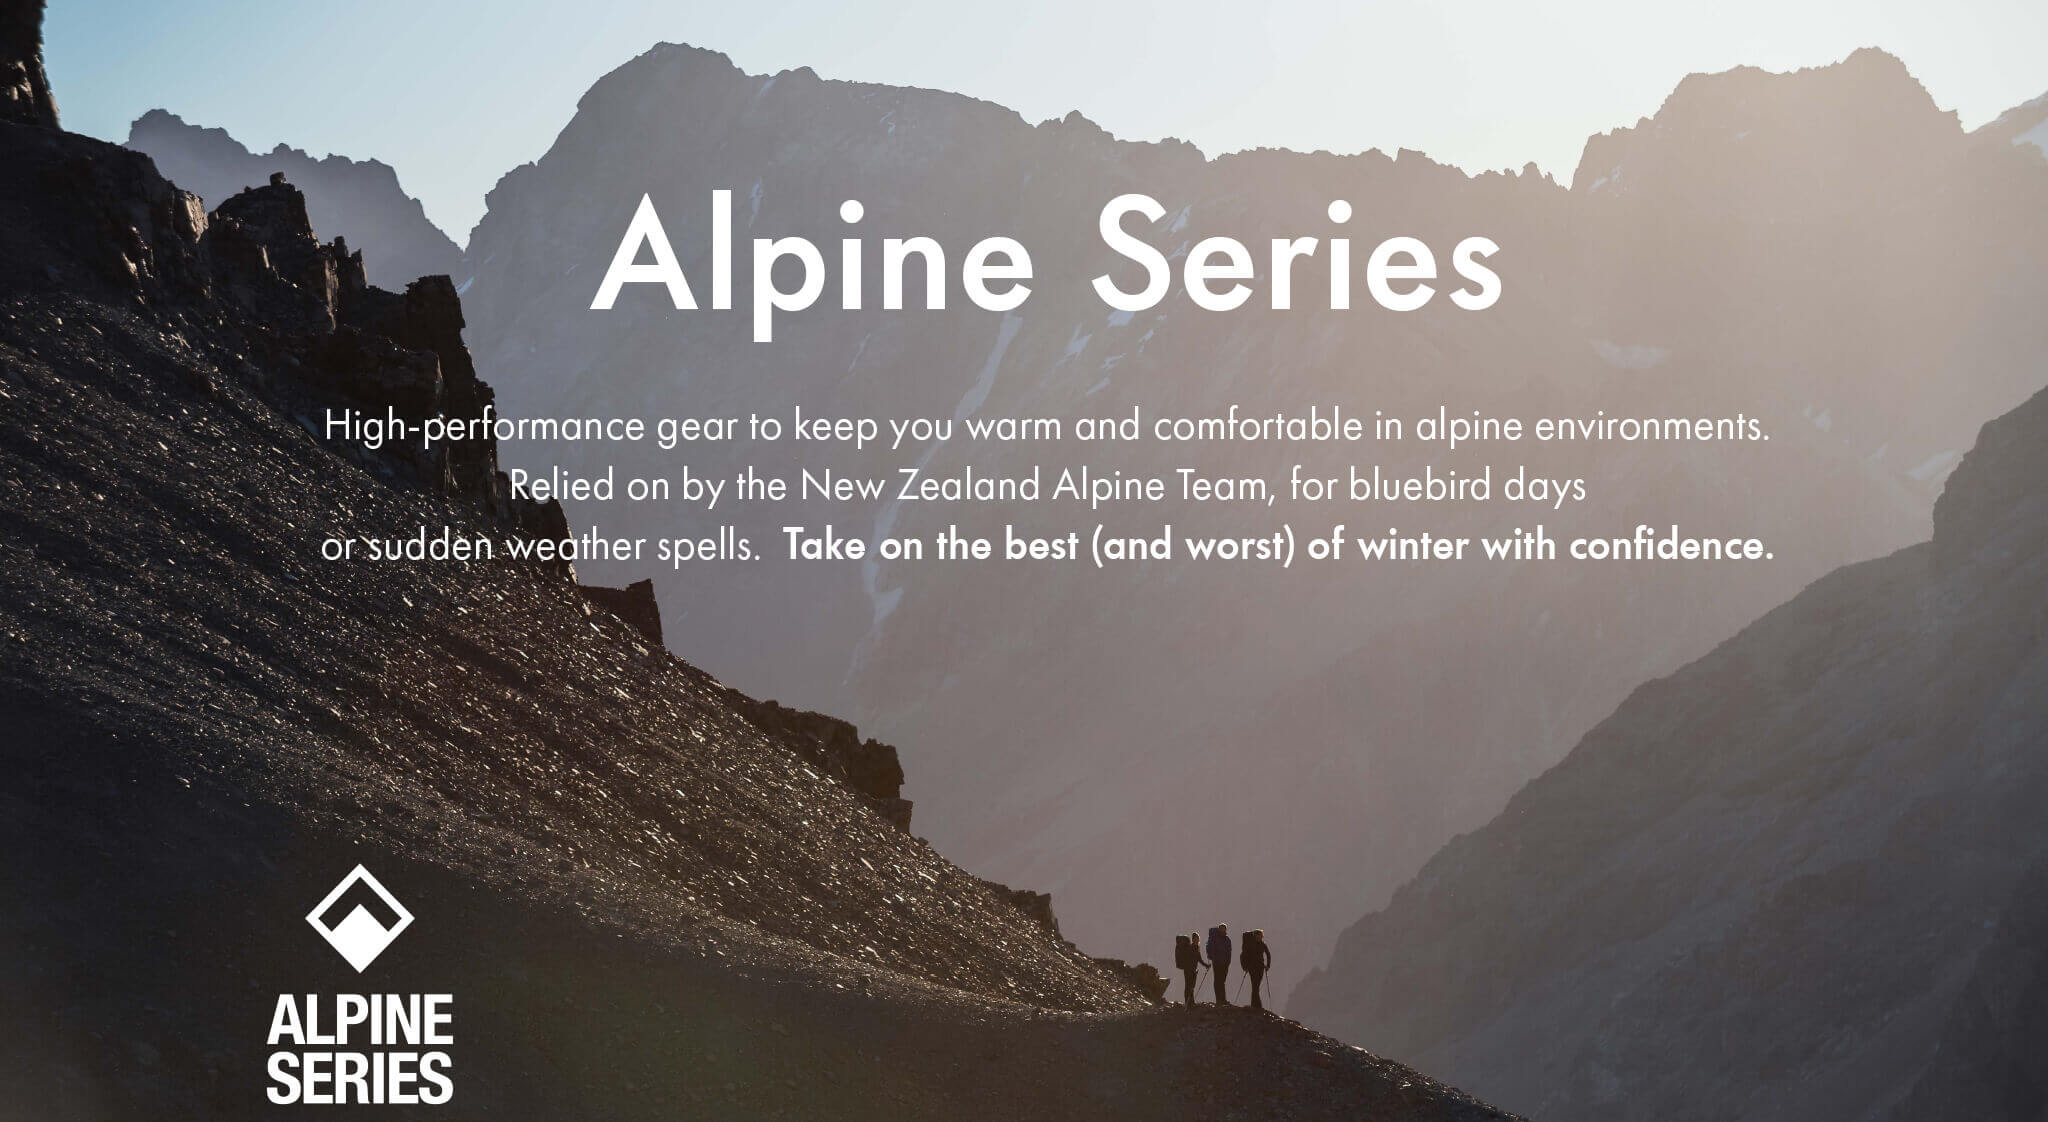 Alpine Series - High-performance gear to keep you warm and comfortable in alpine environments. Relied on by the New Zealand Alpine Team, for bluebird days
or sudden weather spells. Take on the best (and worst) of winter with confidence.